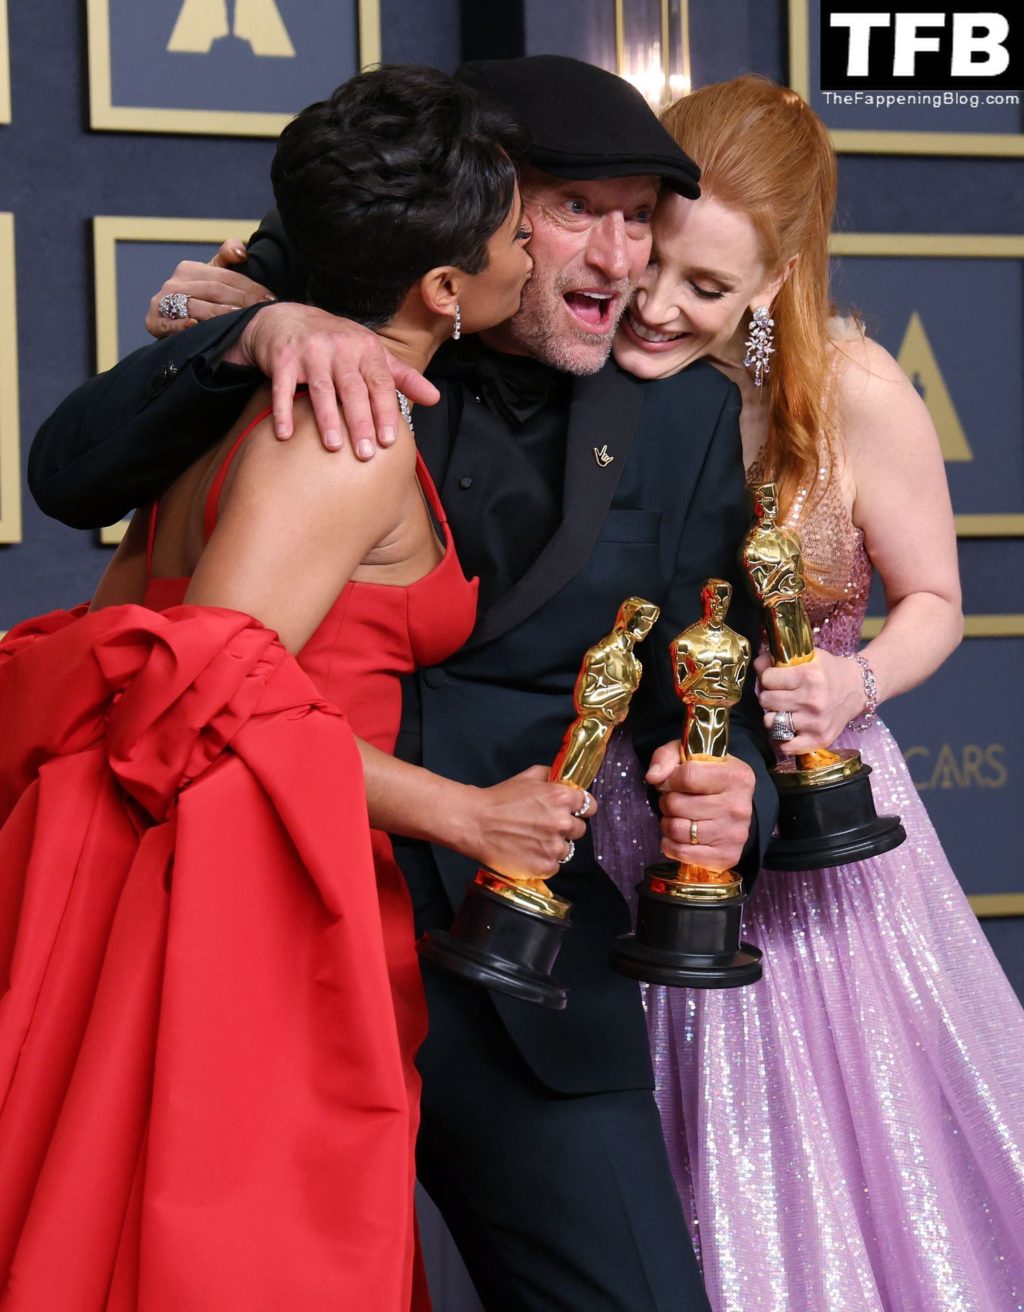 Jessica Chastain Sexy The Fappening Blog 125 1024x1312 - Jessica Chastain Poses With Her Oscar at the 94th Academy Awards (150 Photos)